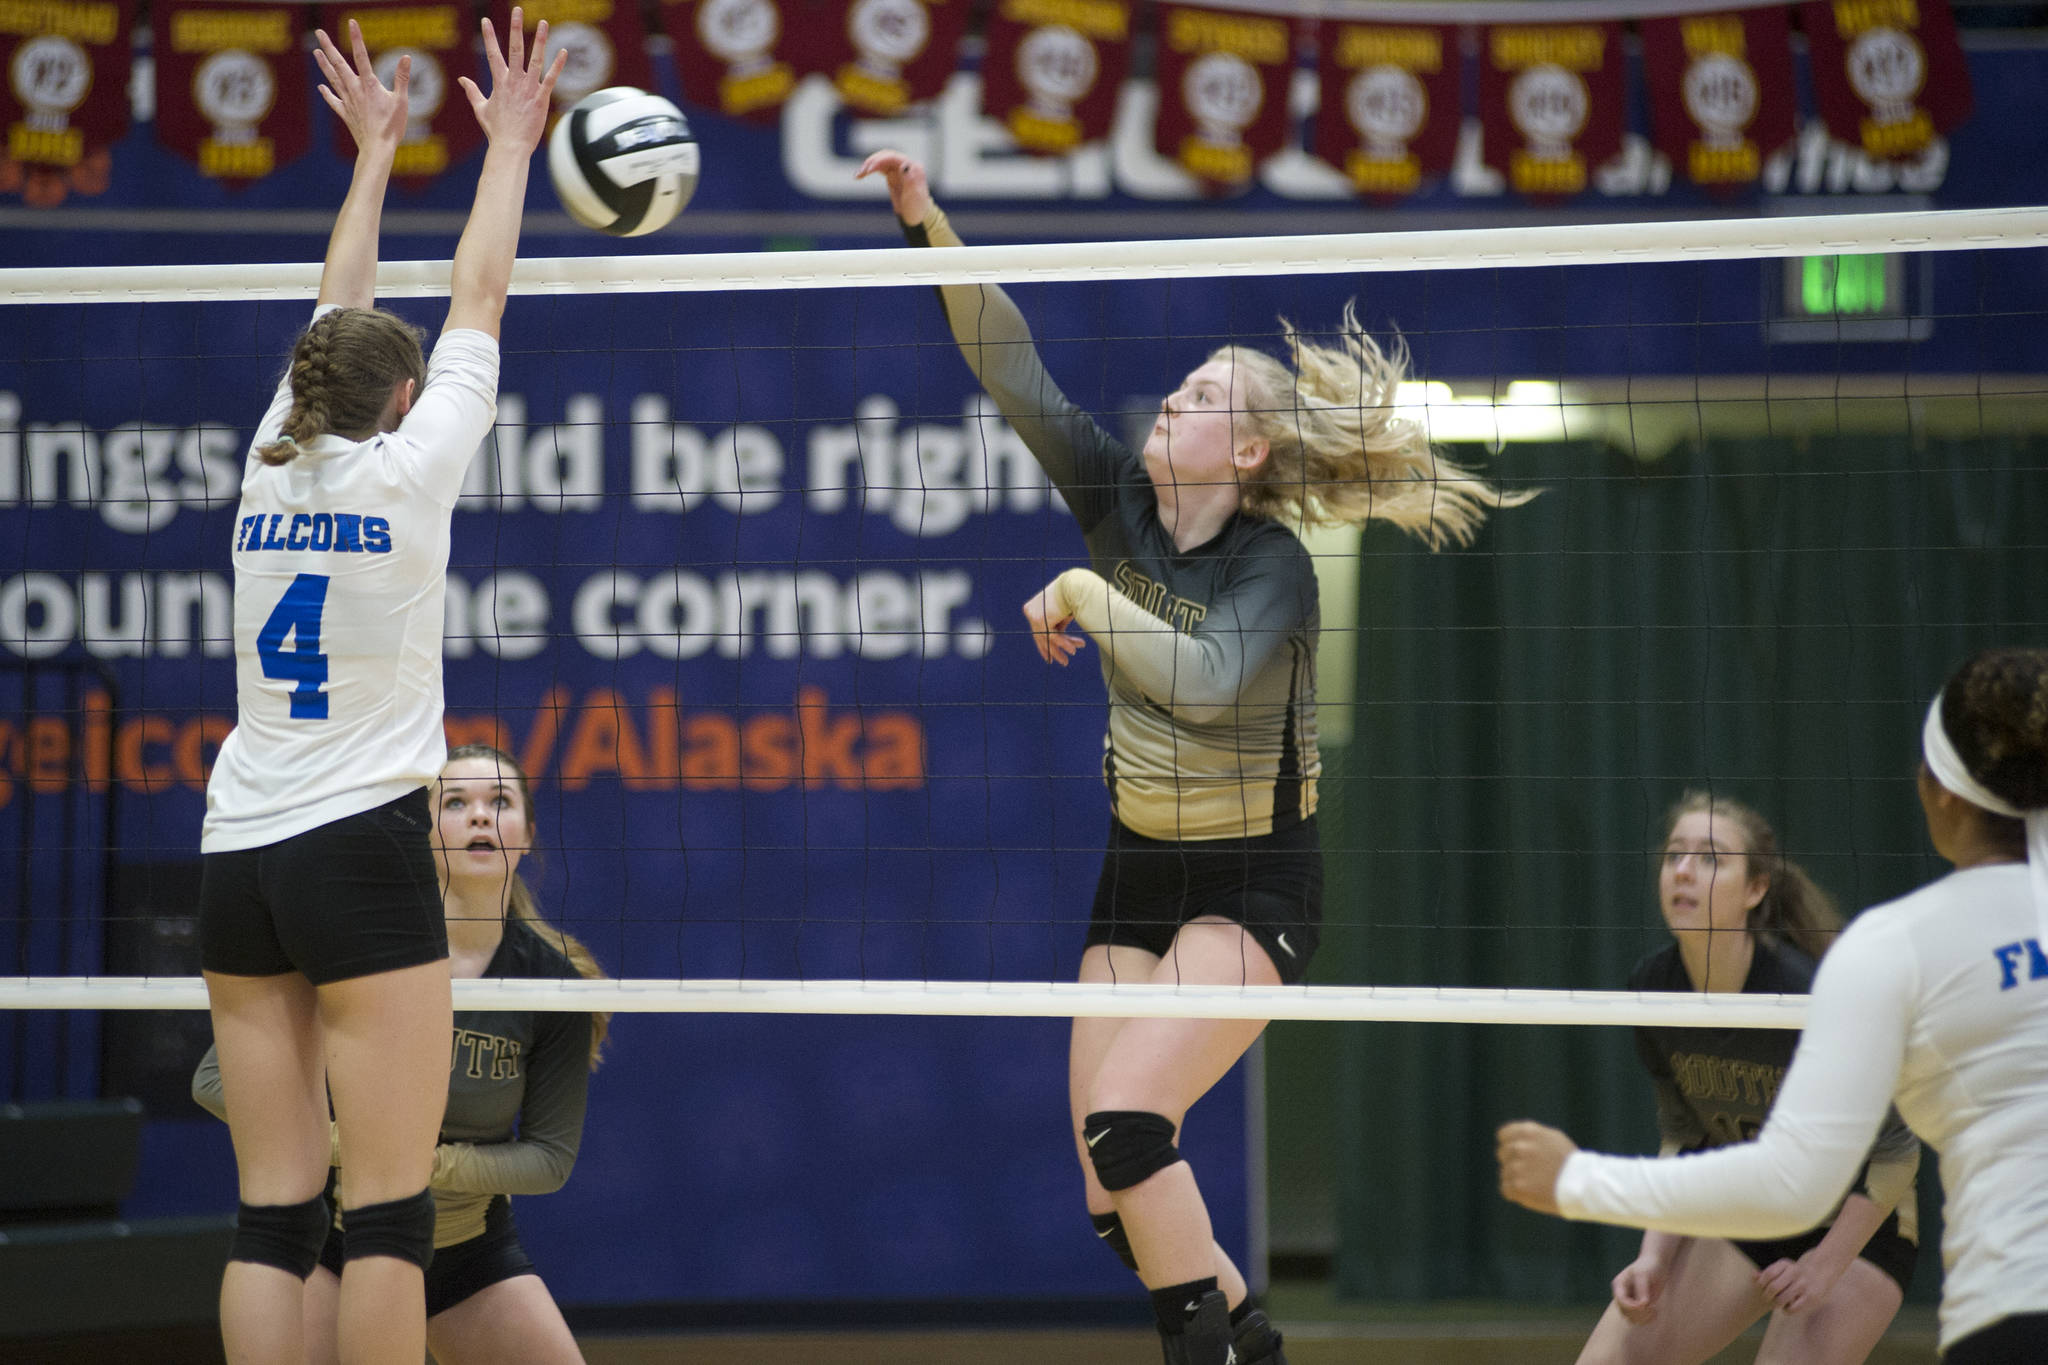 South Anchorage High School senior Erin Doner spikes the ball toward Thunder Mountain’s Sophia Harvey in the ASAA/First National Bank Alaska 3A/4A Volleyball State Championships on Friday at the Alaska Airlines Center in Anchorage. South won 3-0 (25-10, 25-21, 25-12). (Nolin Ainsworth | Juneau Empire)